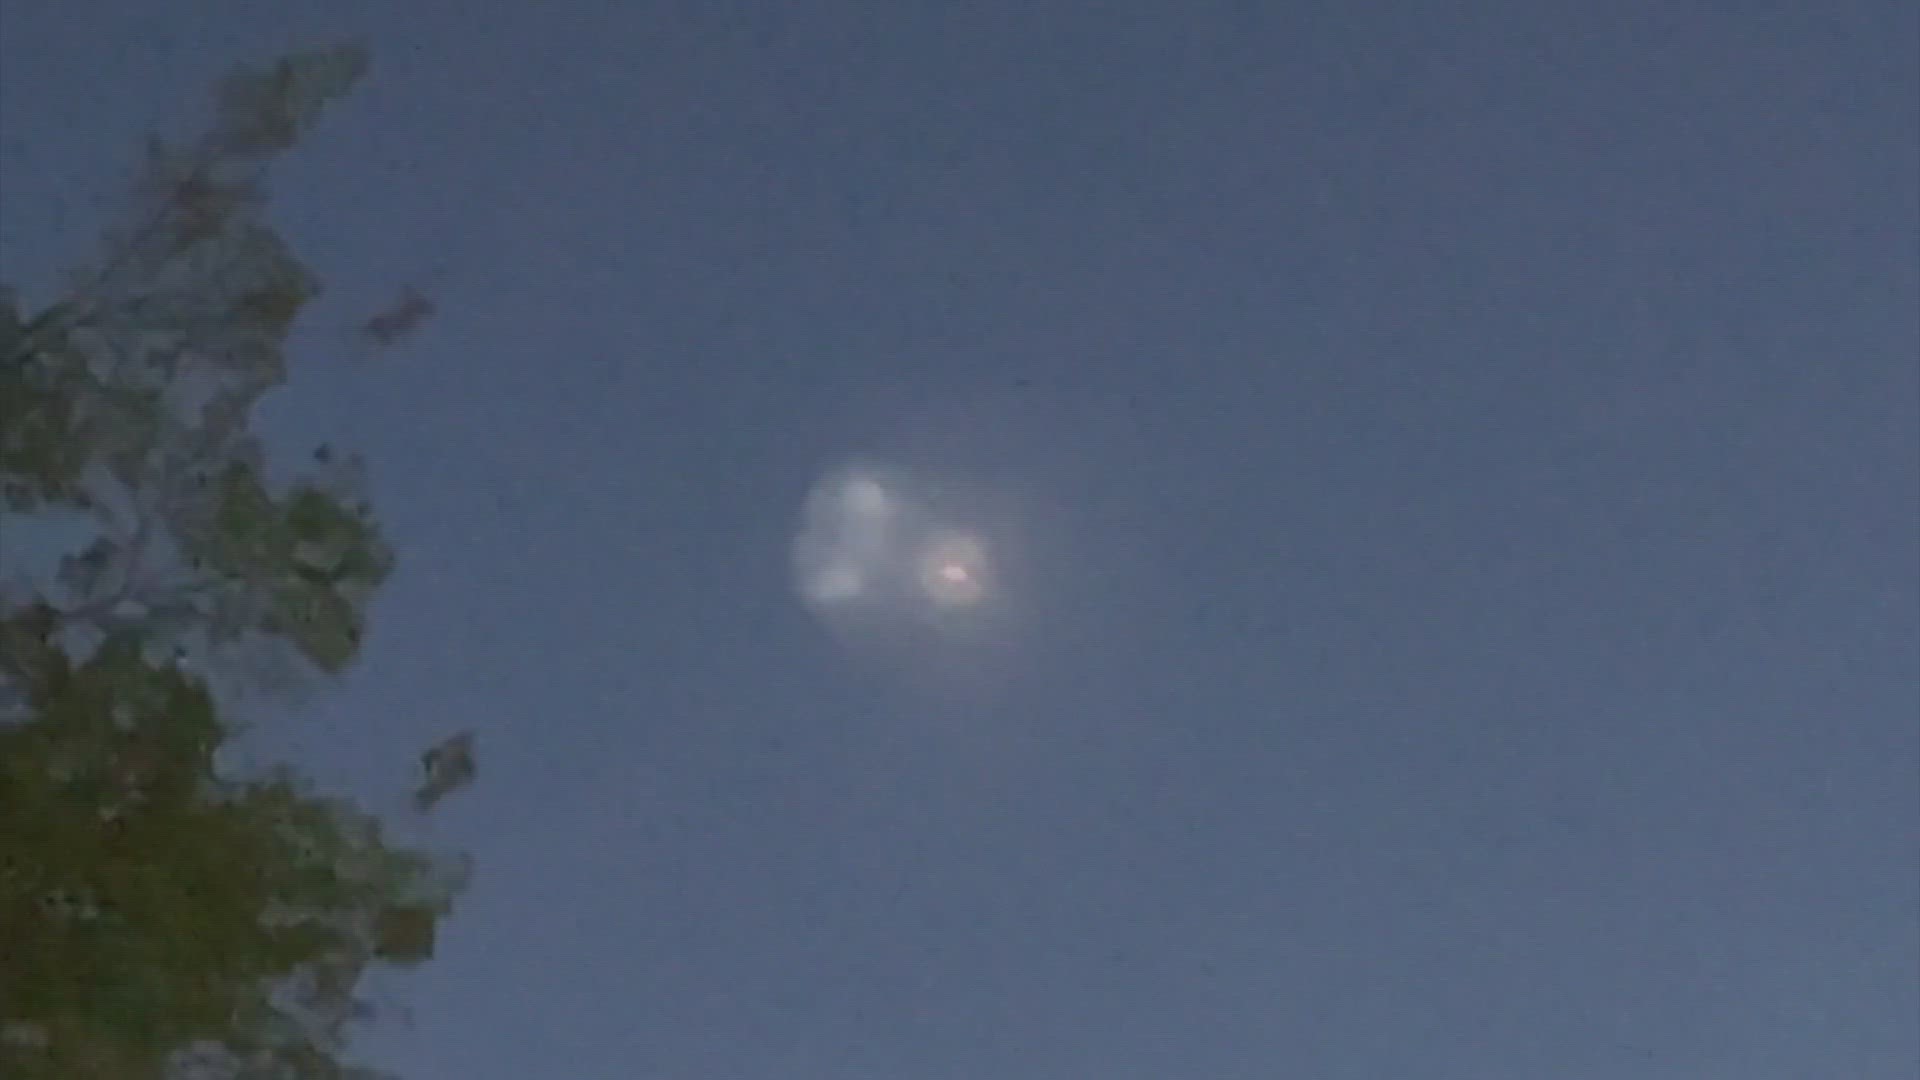 The SpaceX Falcon 9 rocket that launched from Florida on Monday, March 25 was seen across Texas.